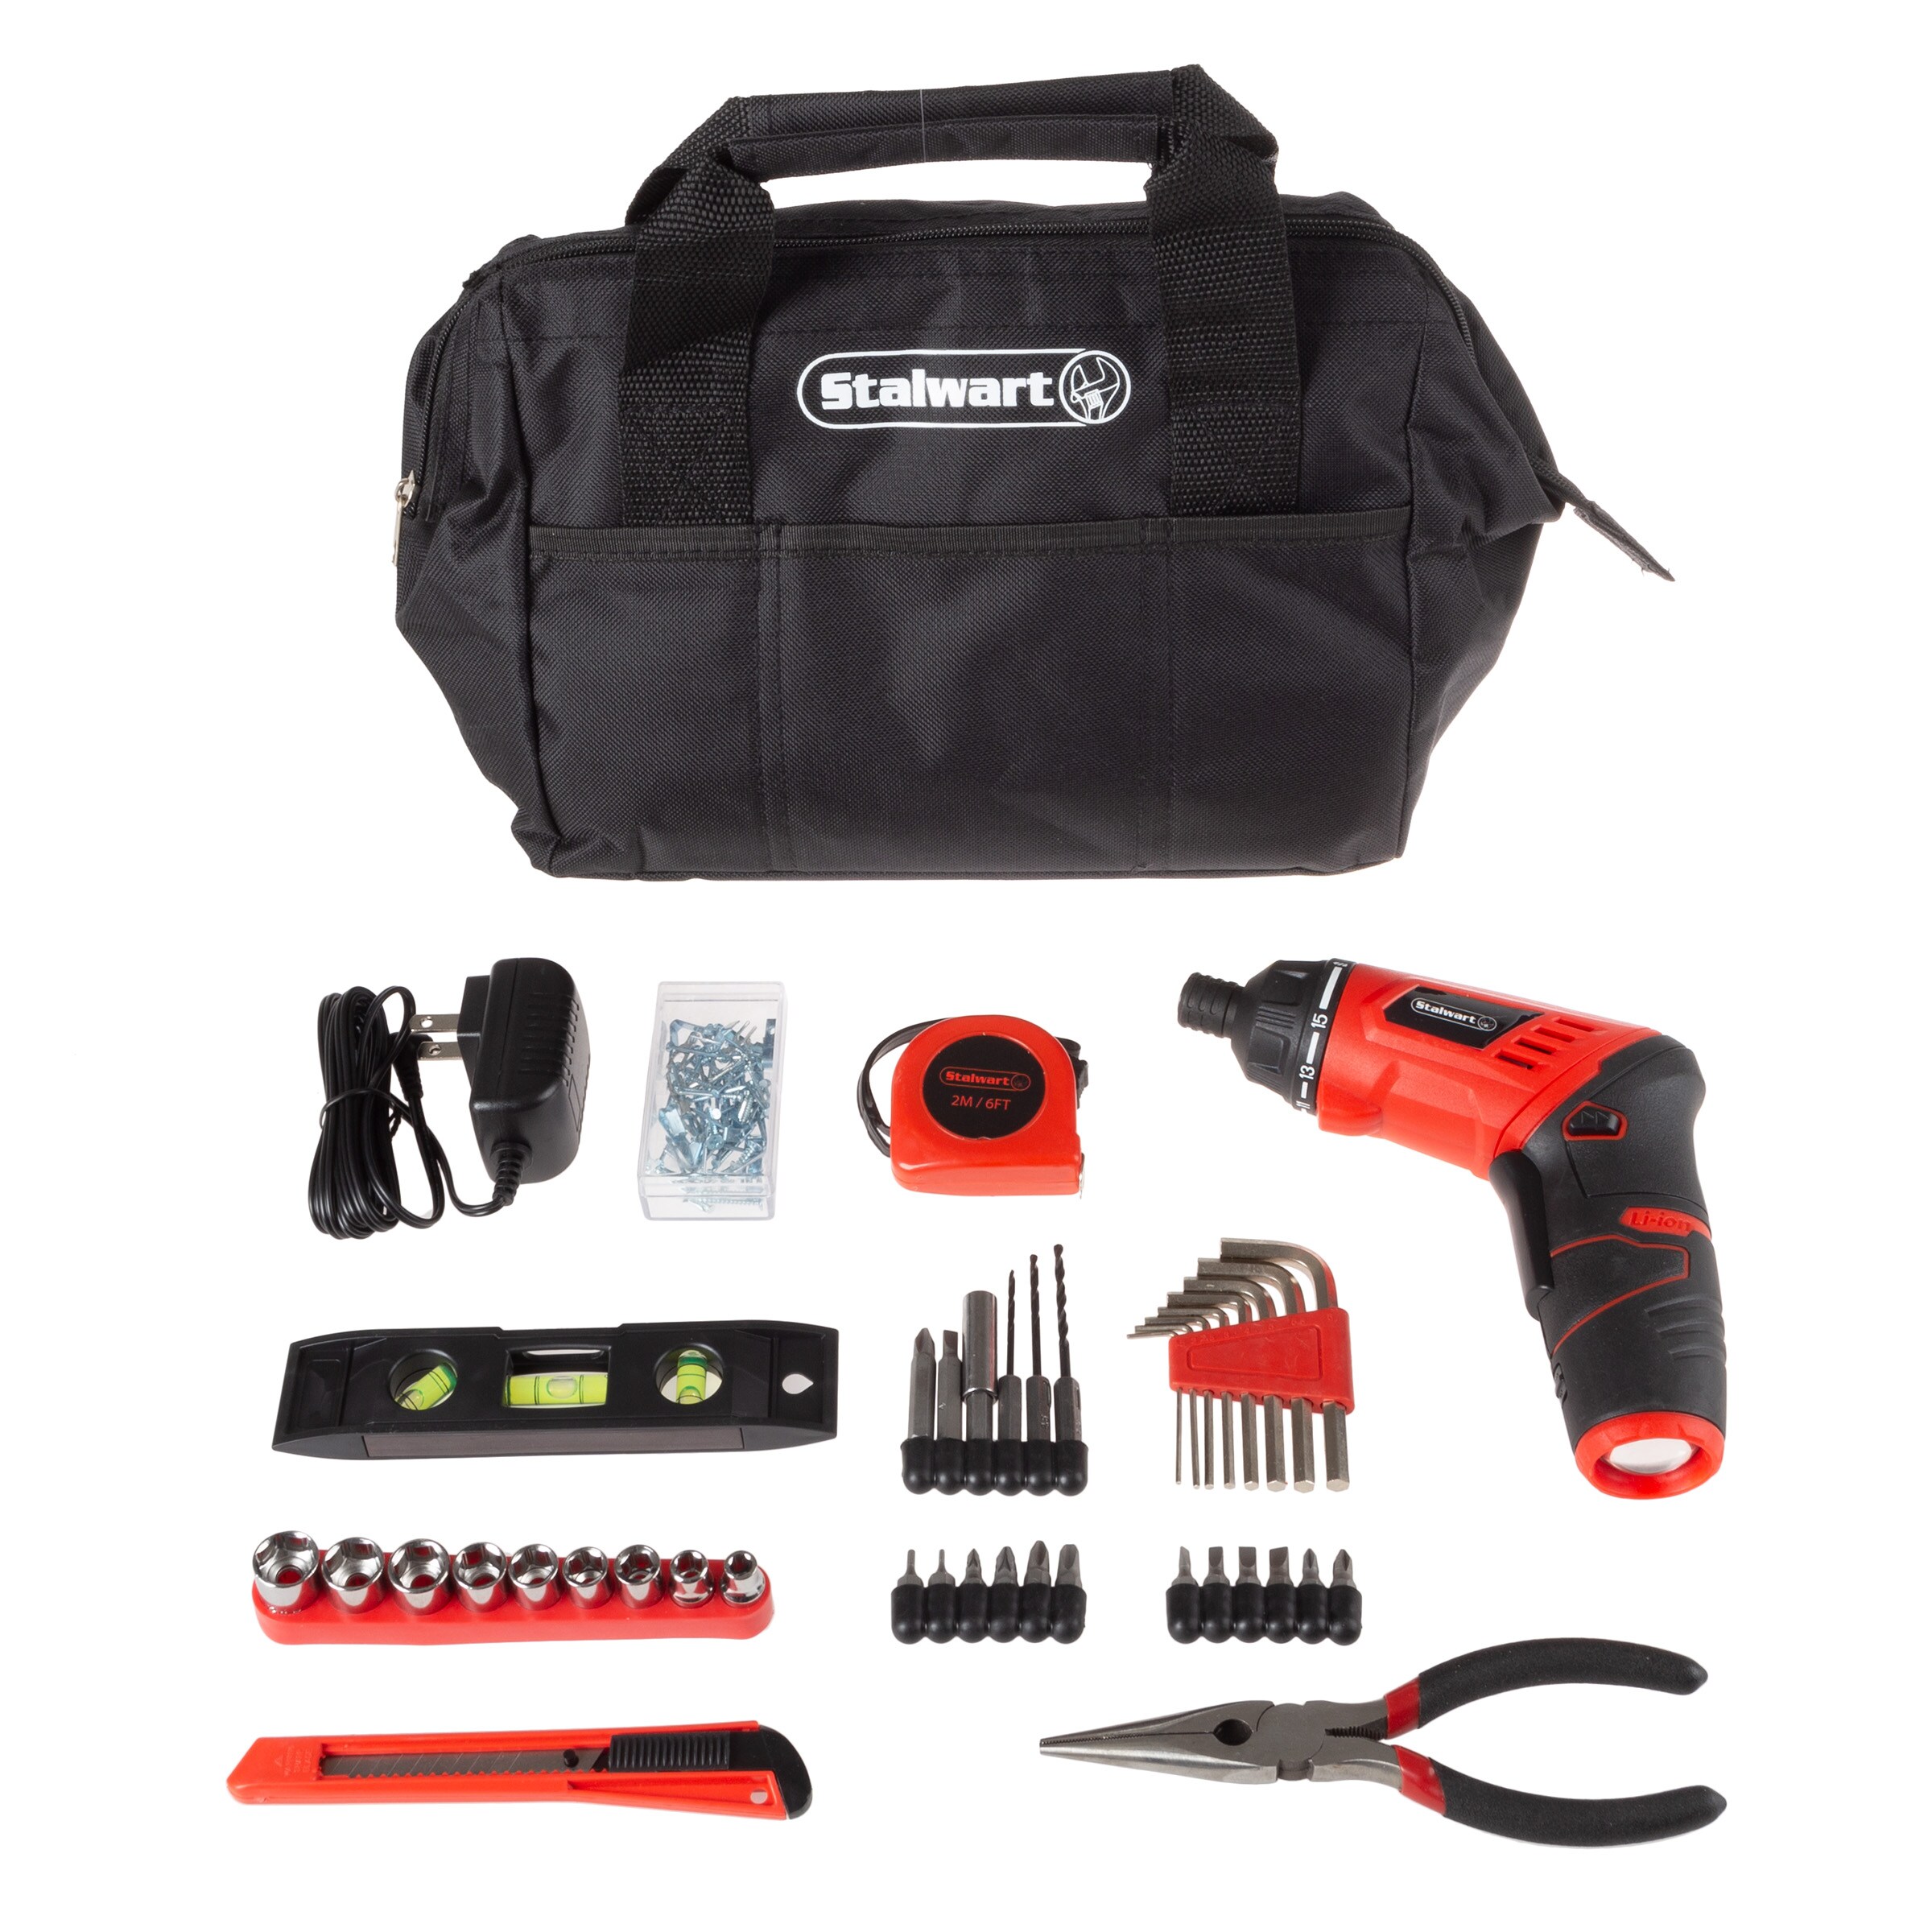 Fleming Supply Cordless Drill And 3.6v Driver Set - Red And Black